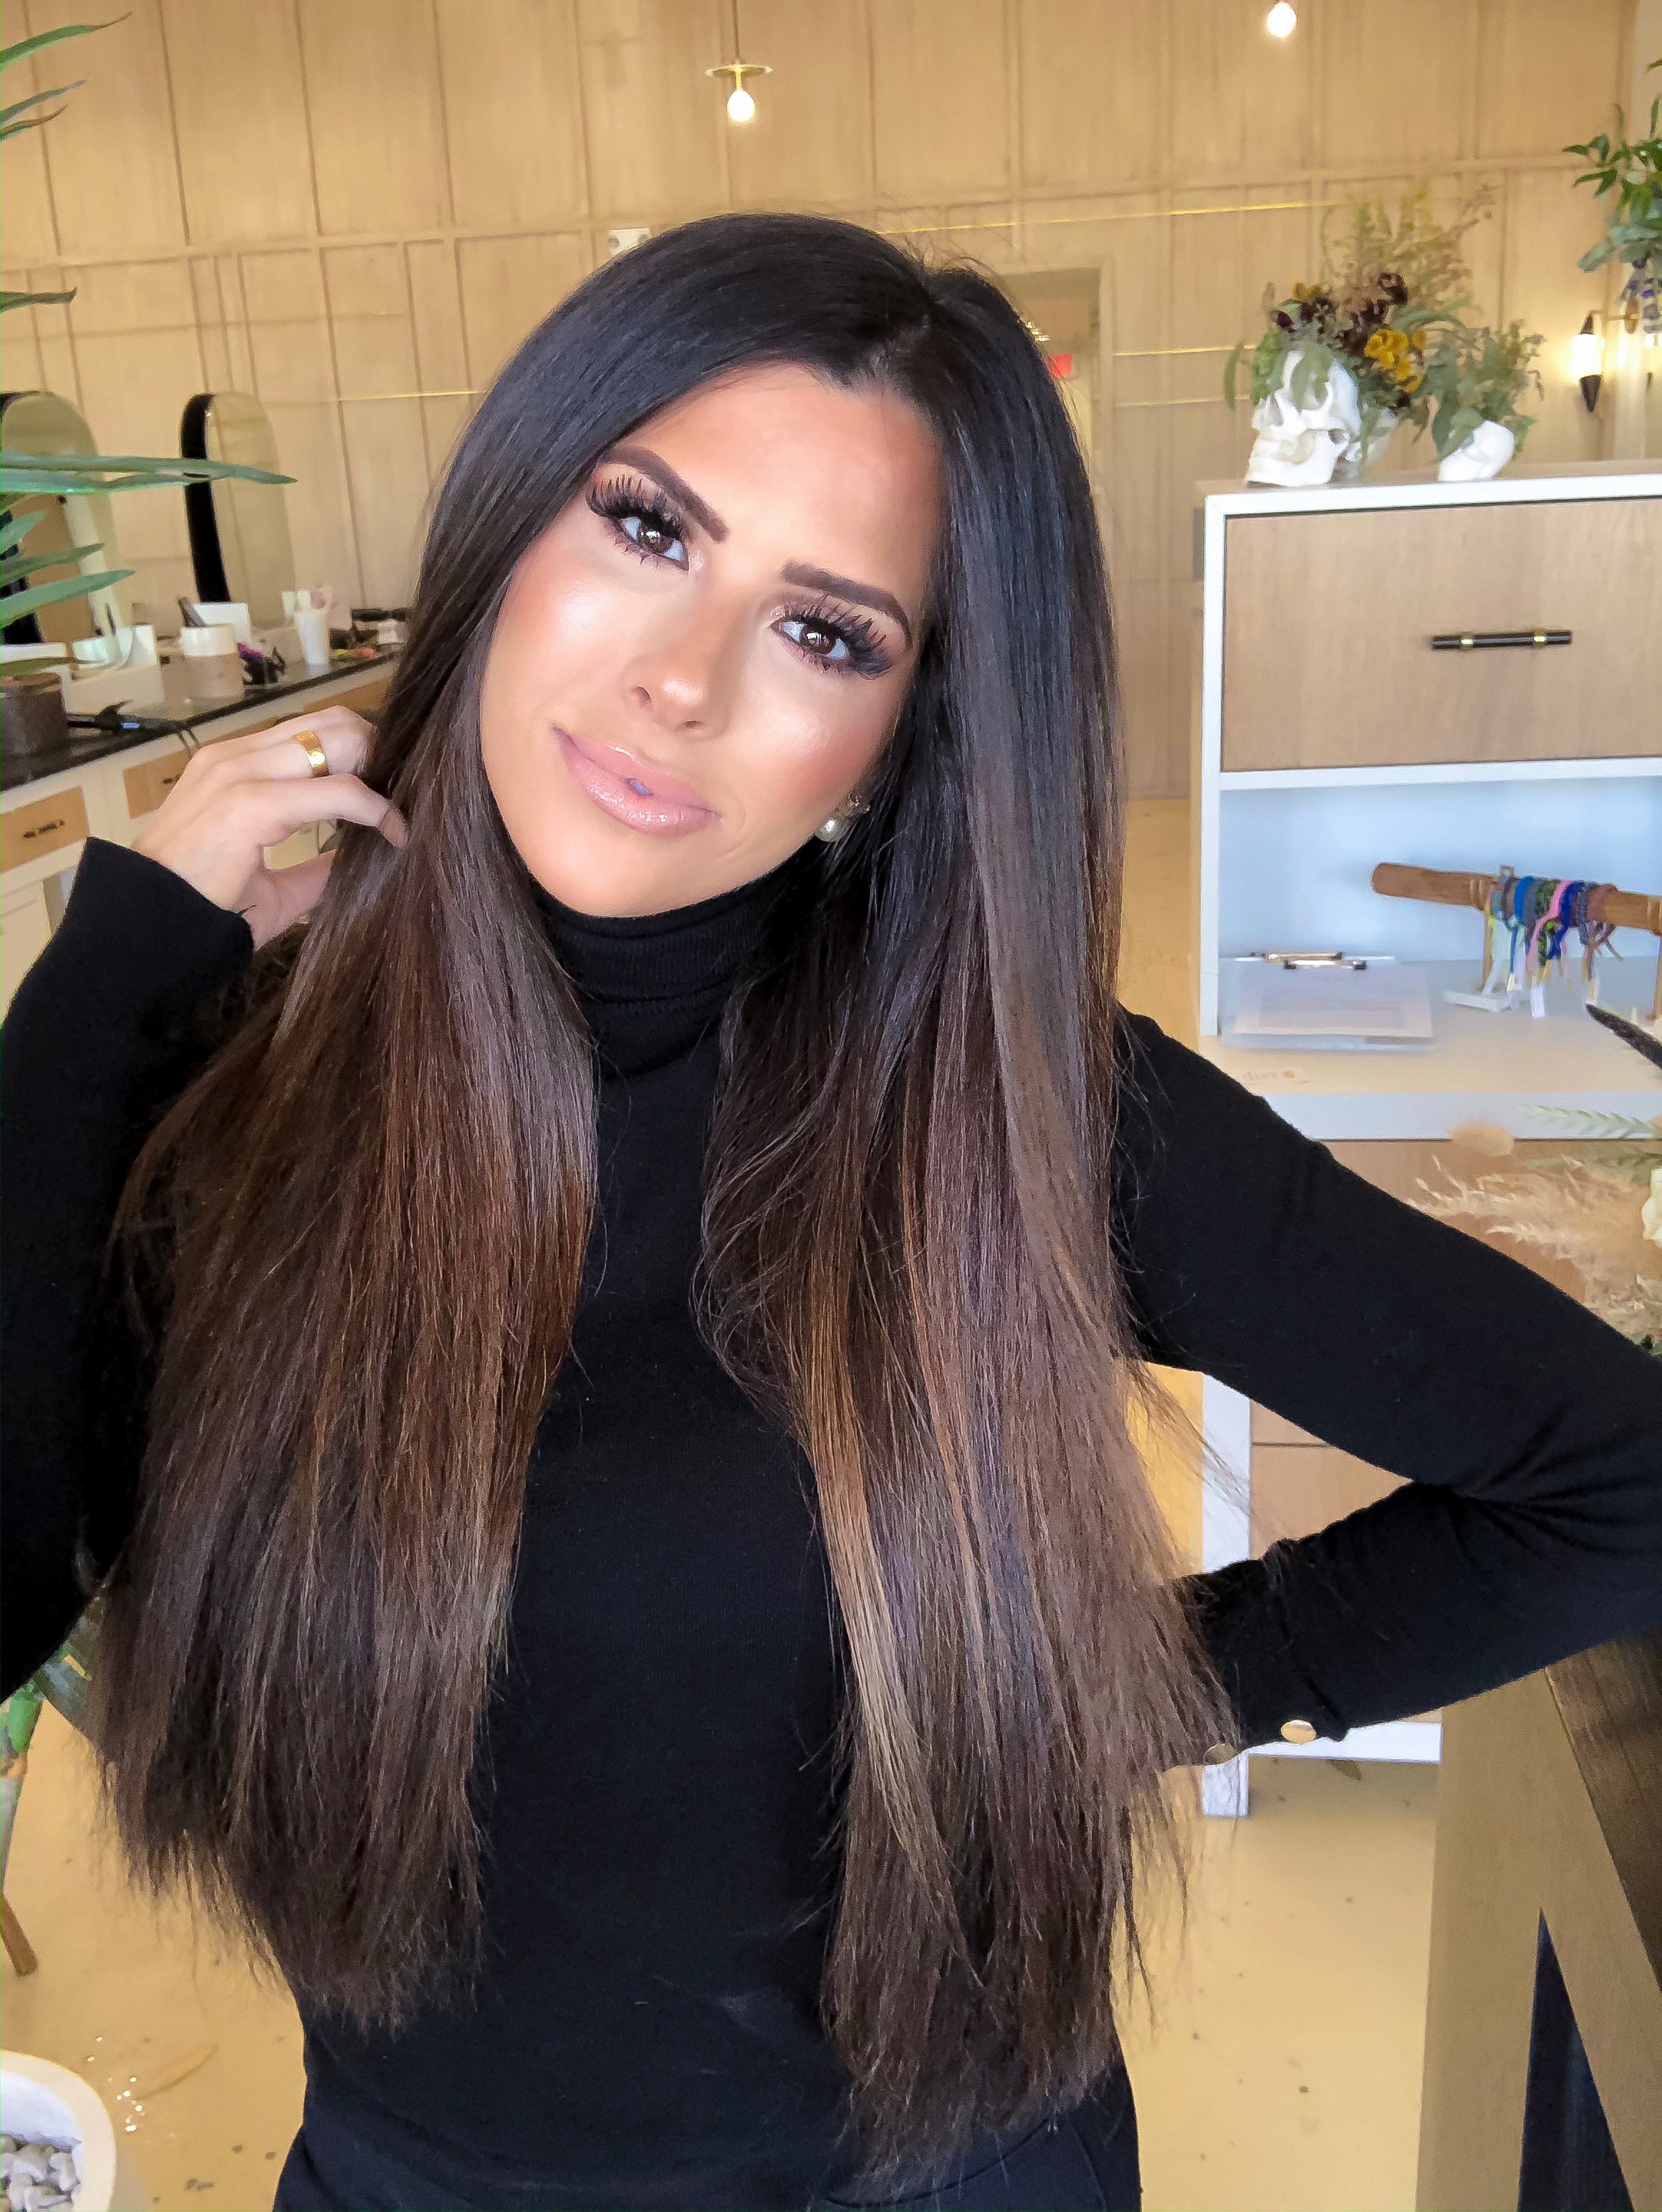 emily gemma hair extensions, straight hair brunette balayage, hair by chrissy |  BEST HAIR PRODUCTS FOR 2019💁🏻‍♀️ || PART 1 by popular US beauty blog, The Sweetest Thing: image of a woman with brunette hair extensions. 